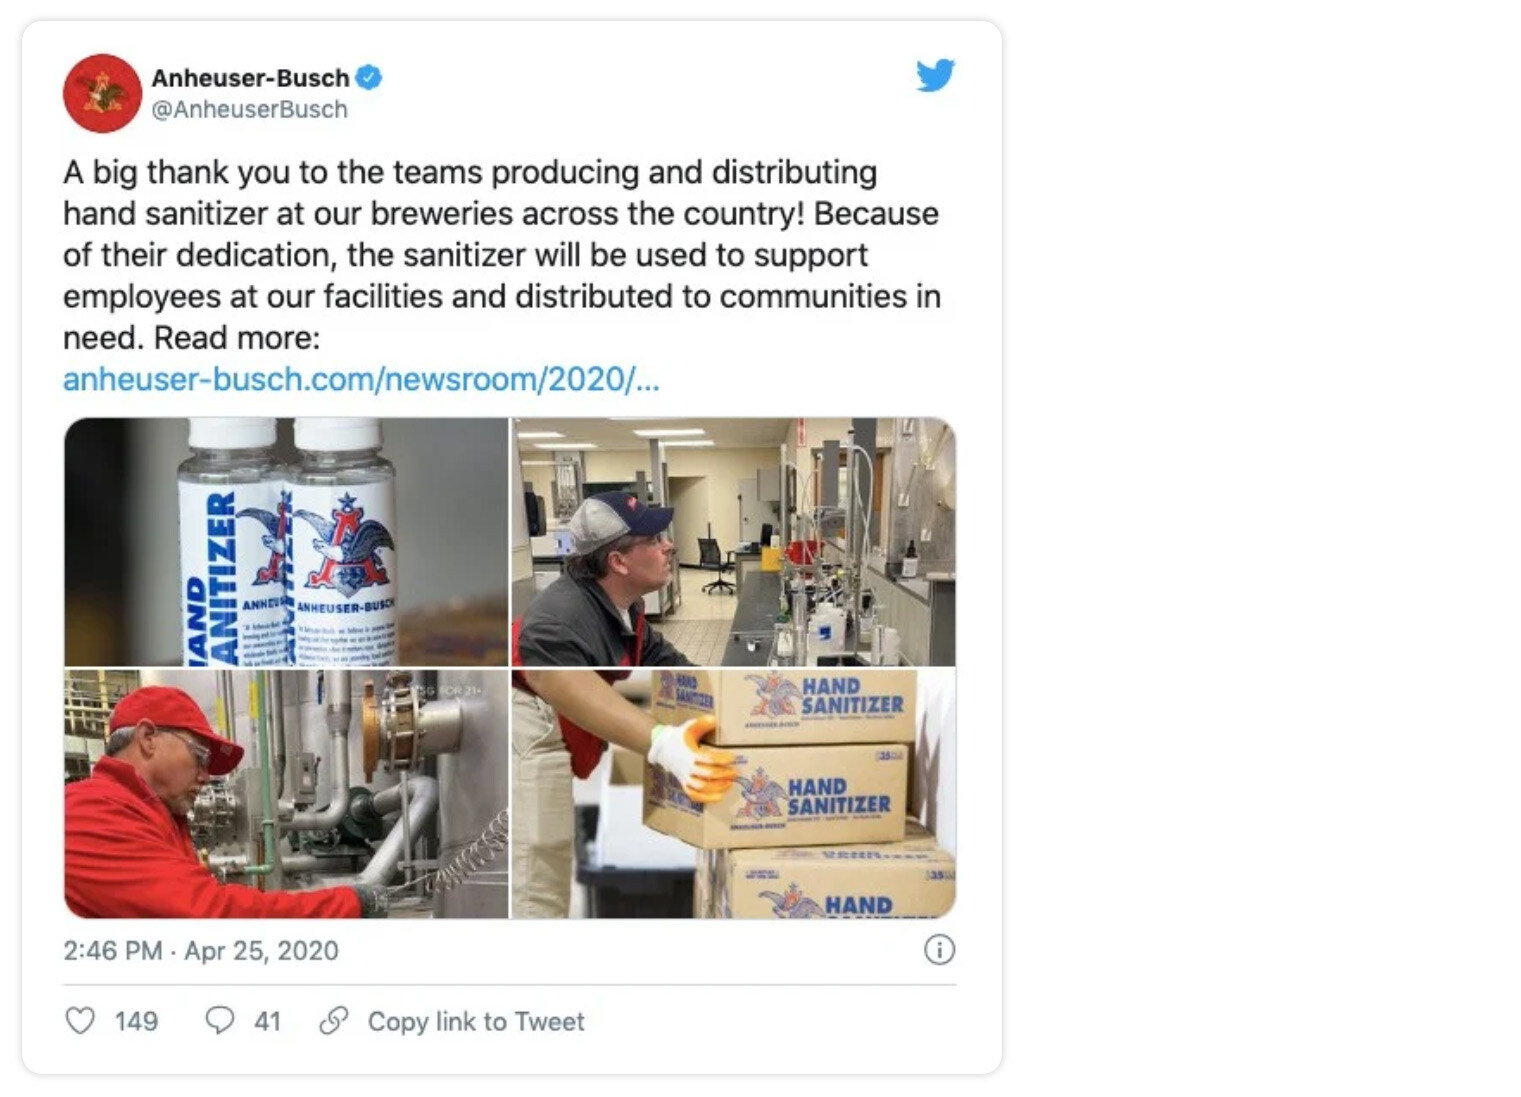 Anheuser-Busch Twitter post about producing and distributing hand sanitizer